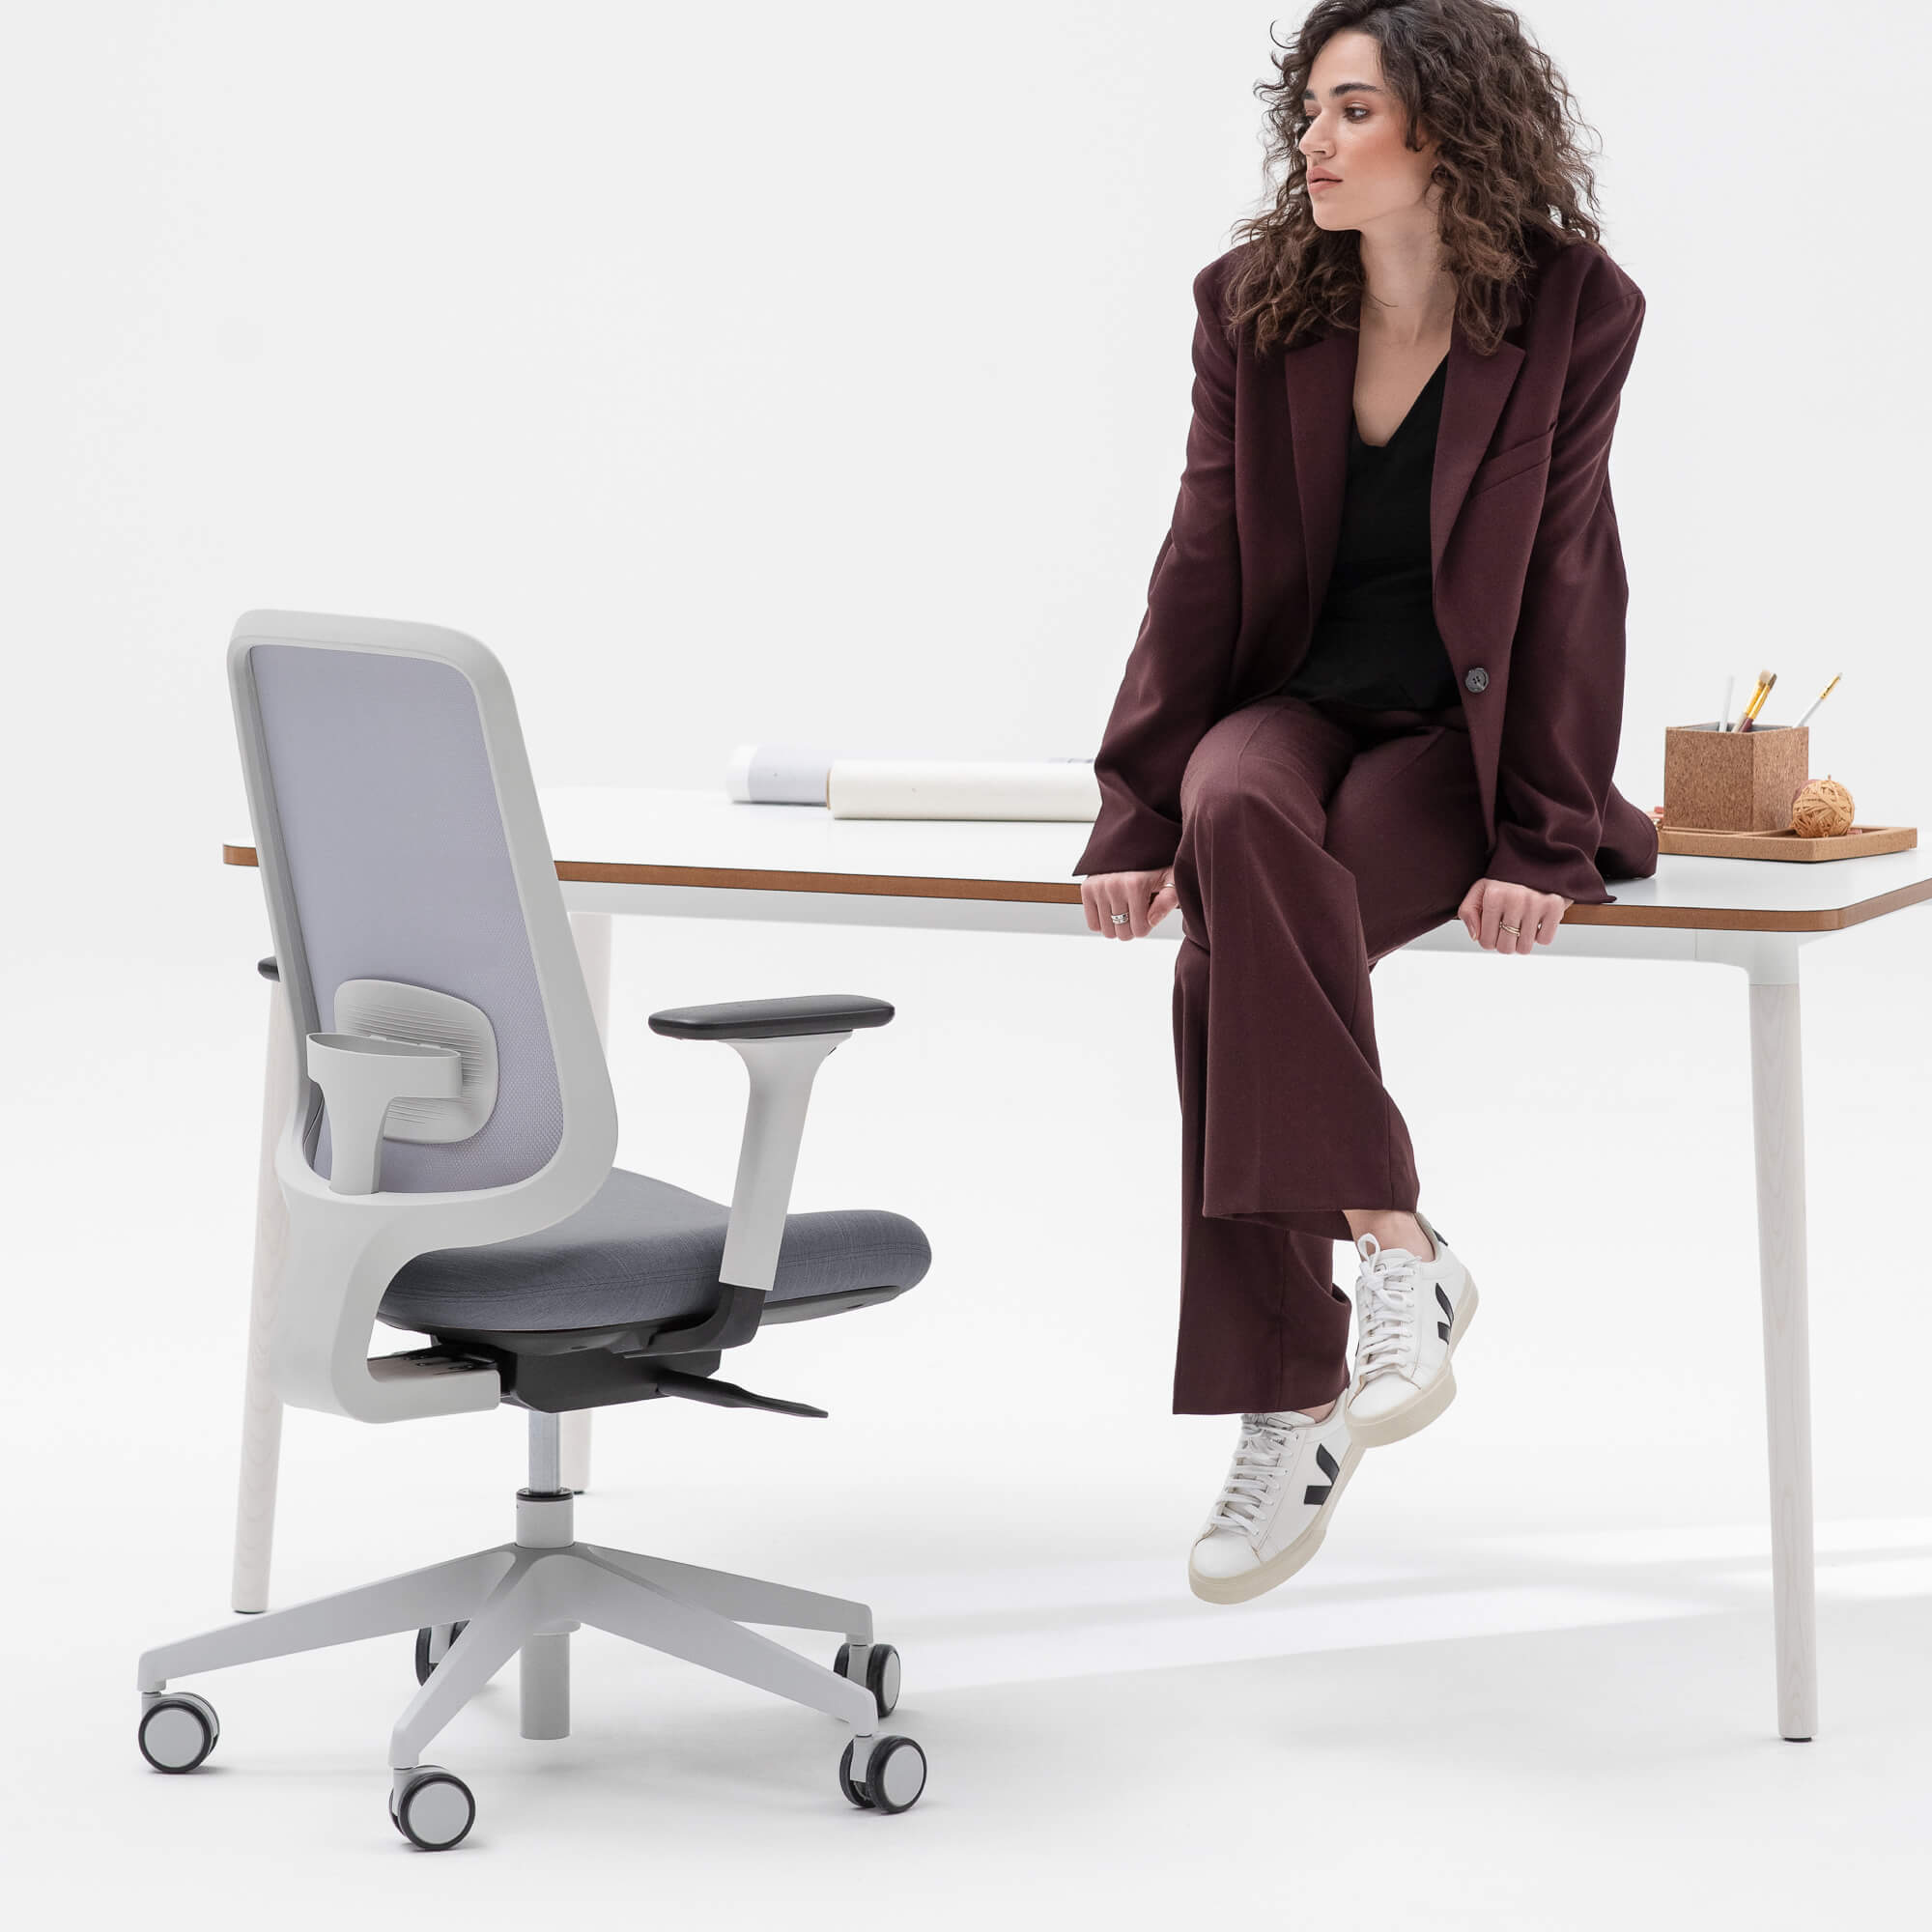 Person Sitting On The Edge Of A Workstation With Their Legs Crossed And A Task One Office Chair Next To Them